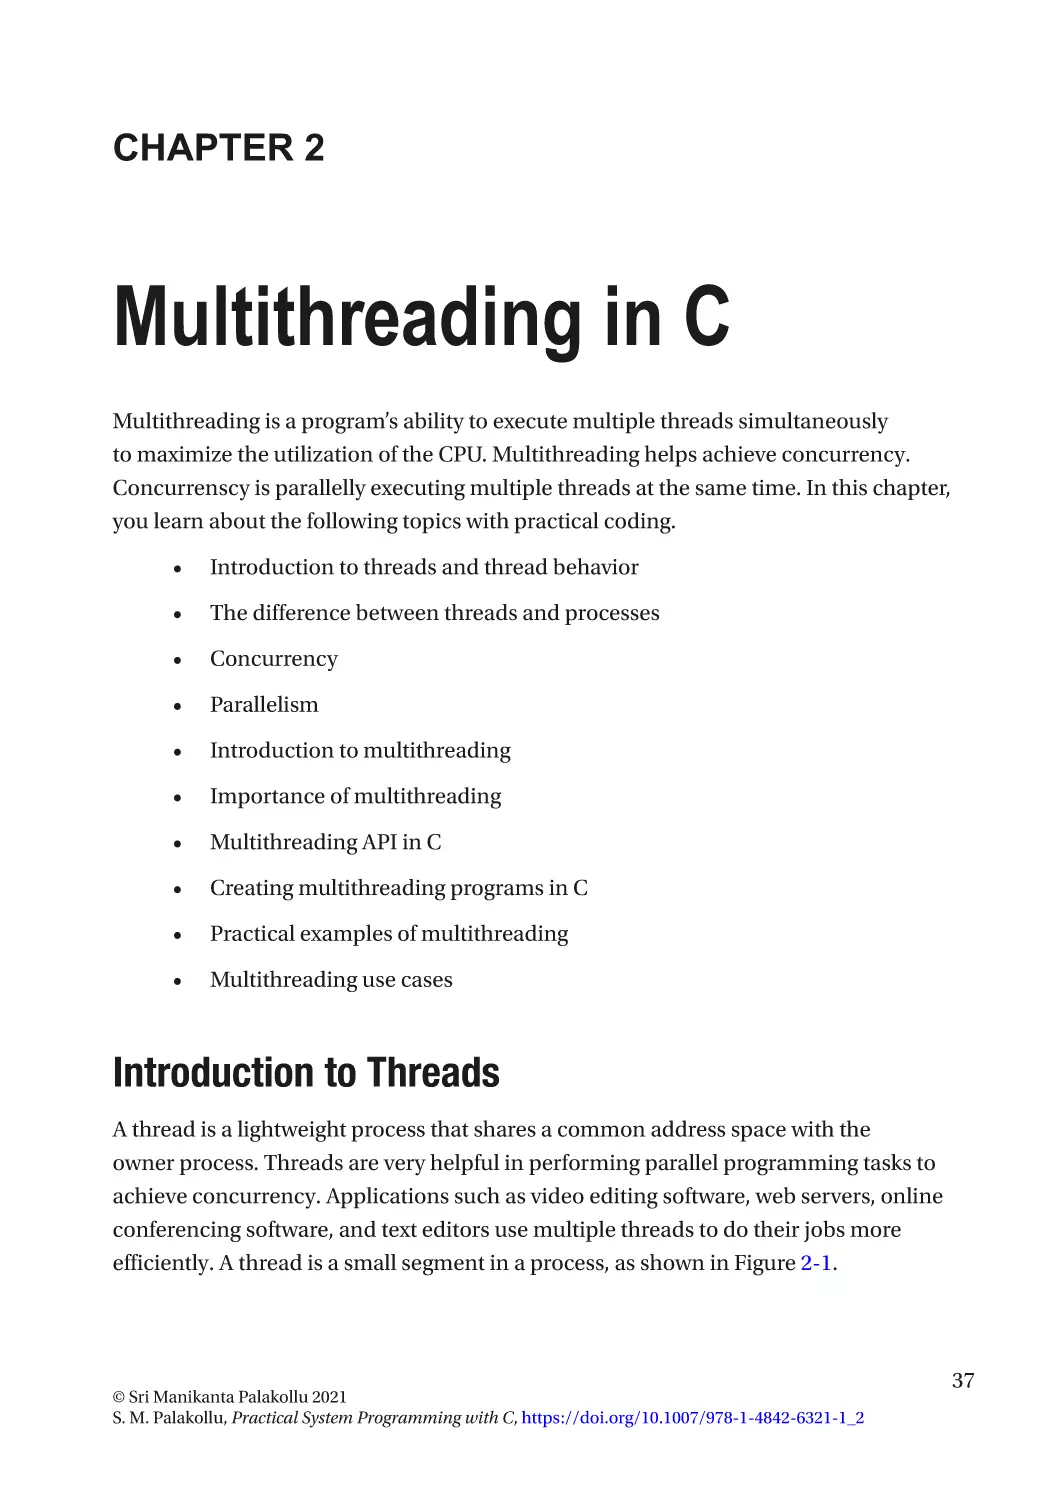 Chapter 2
Introduction to Threads